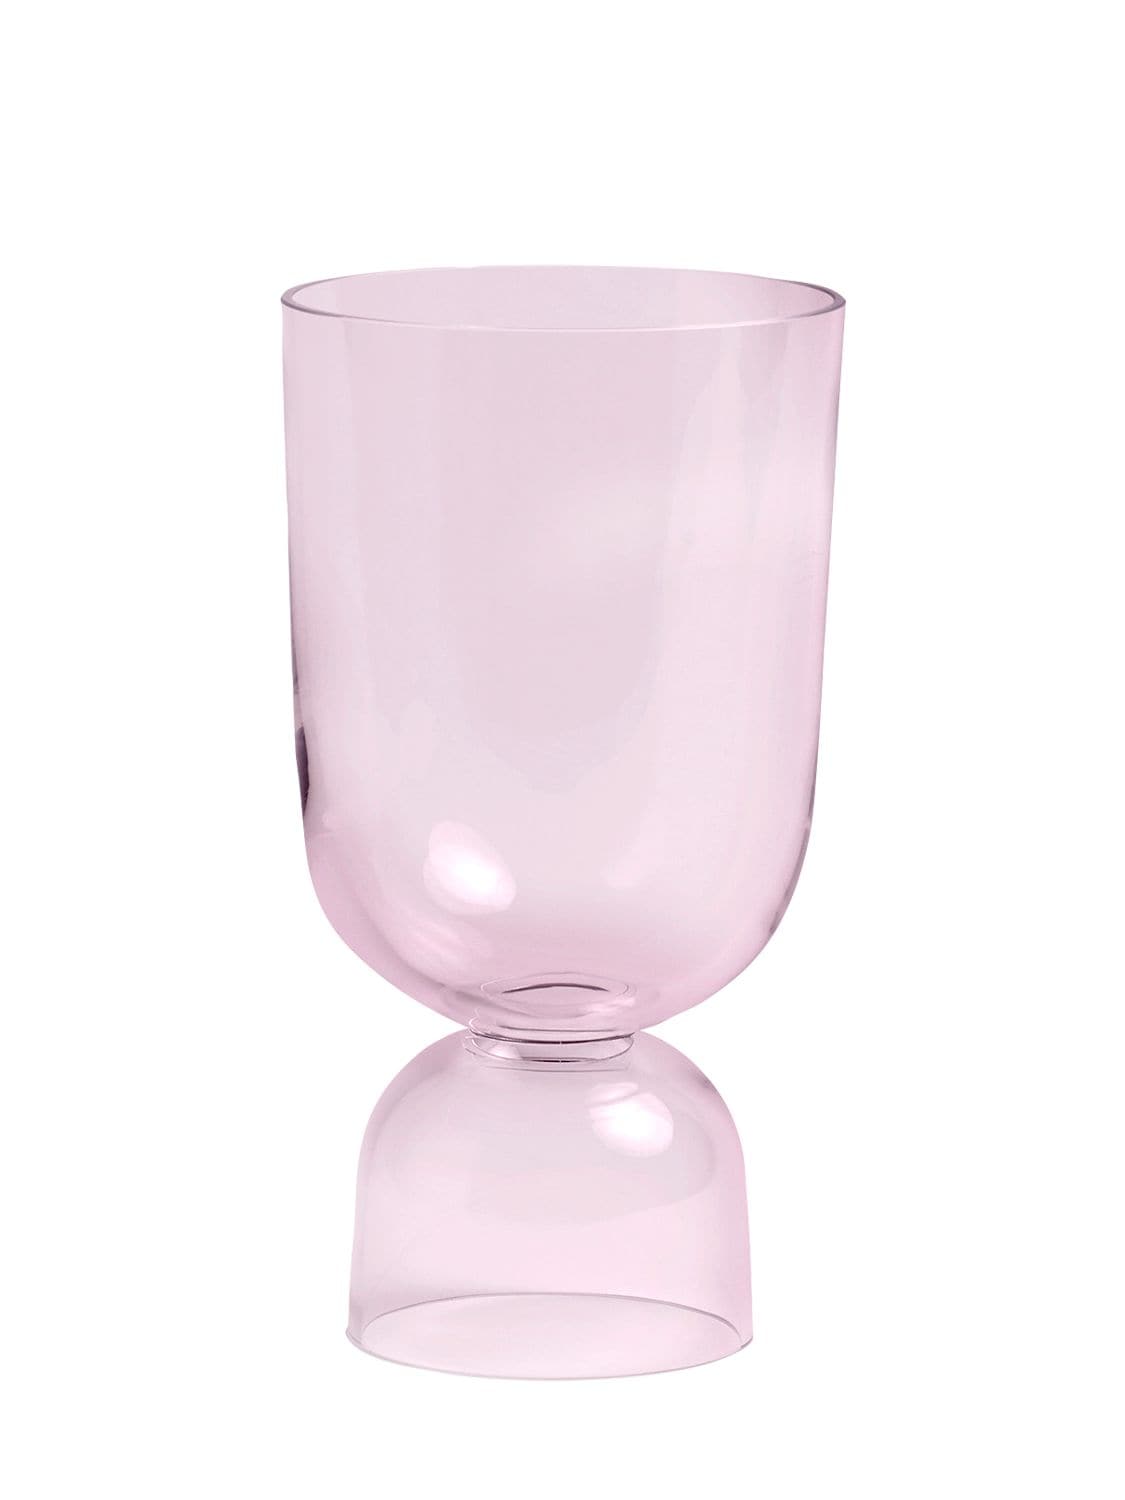 Hay Small Bottoms Up Vase In Soft Pink